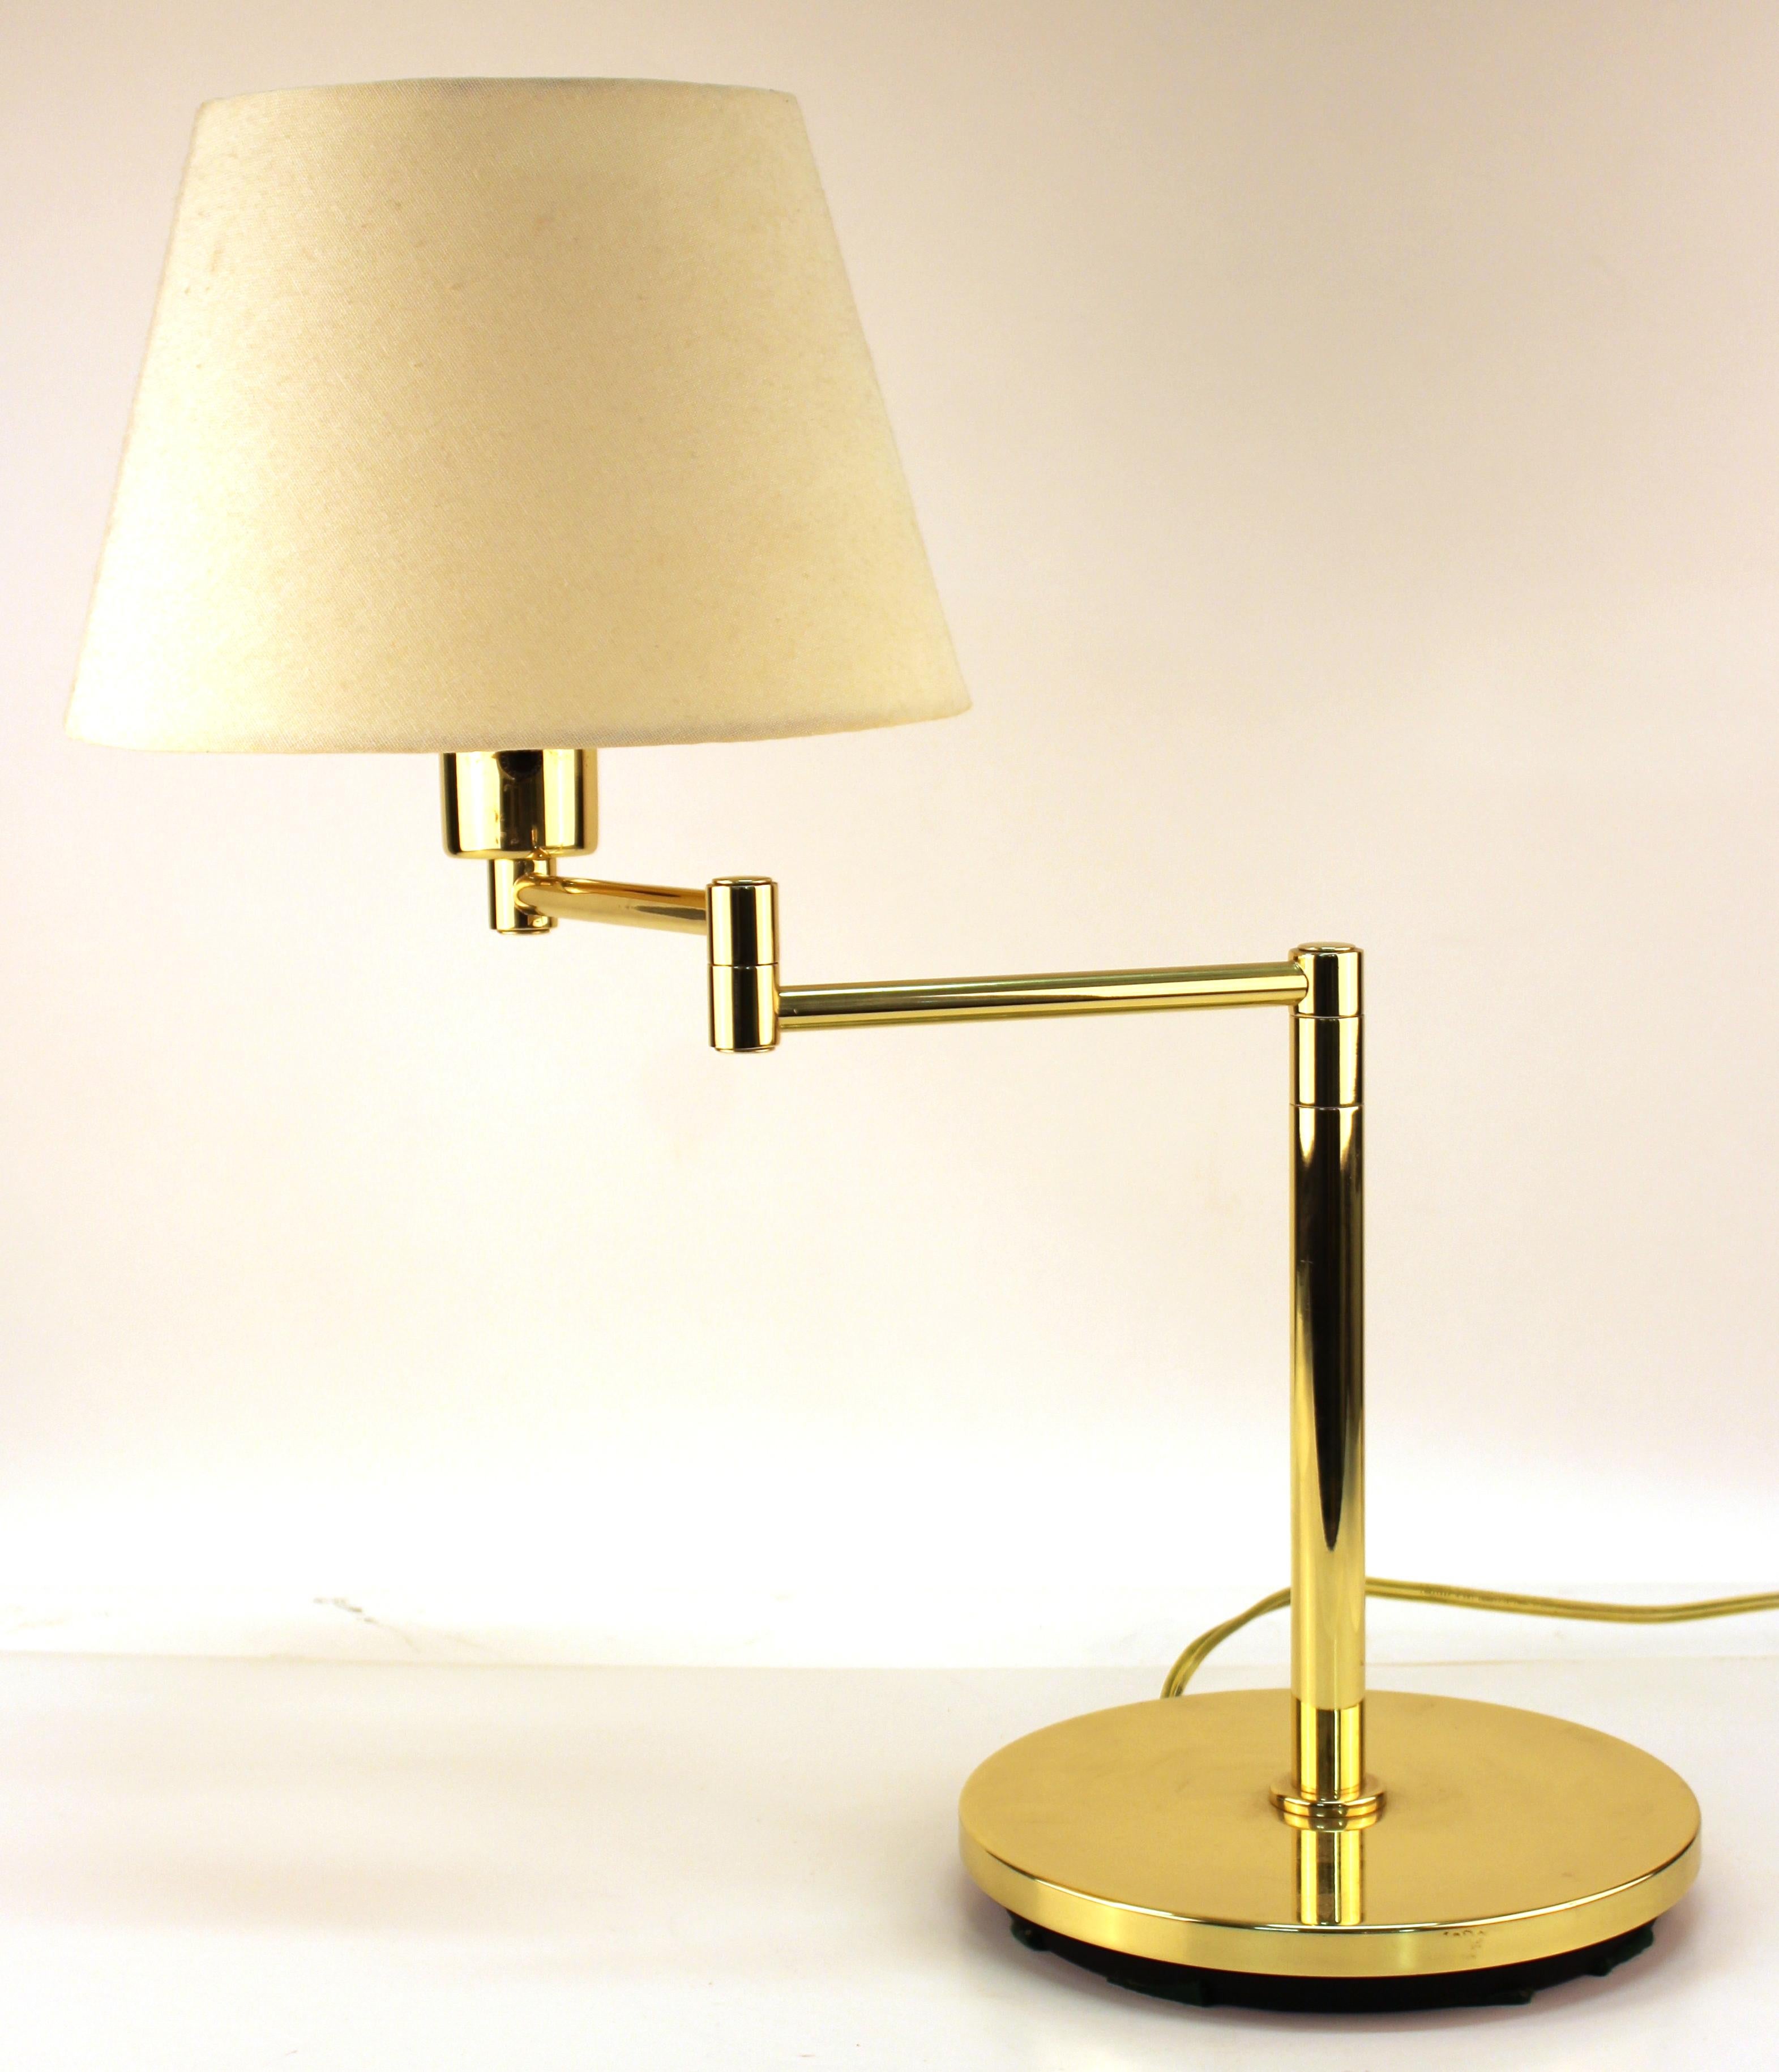 Mid-Century Modern style pair of table lamps with extendable arms, made by Hinsen in the mid- to late 20th century. The pair is in great vintage condition, with some minor wear to the metal base.

Note: Shades are for display purpose but can be